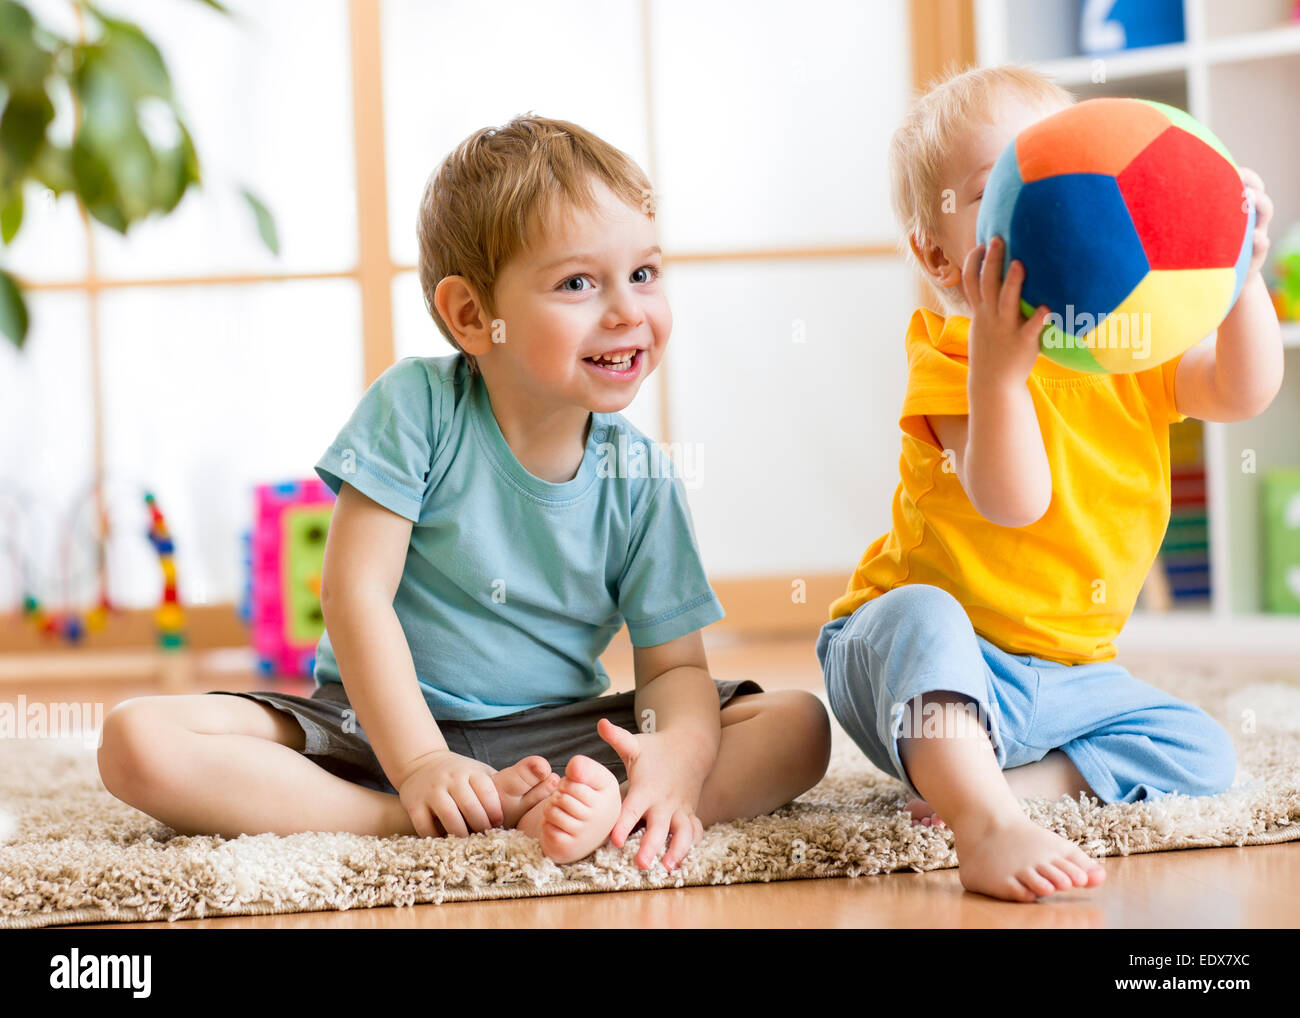 children play with ball indoor Stock Photo